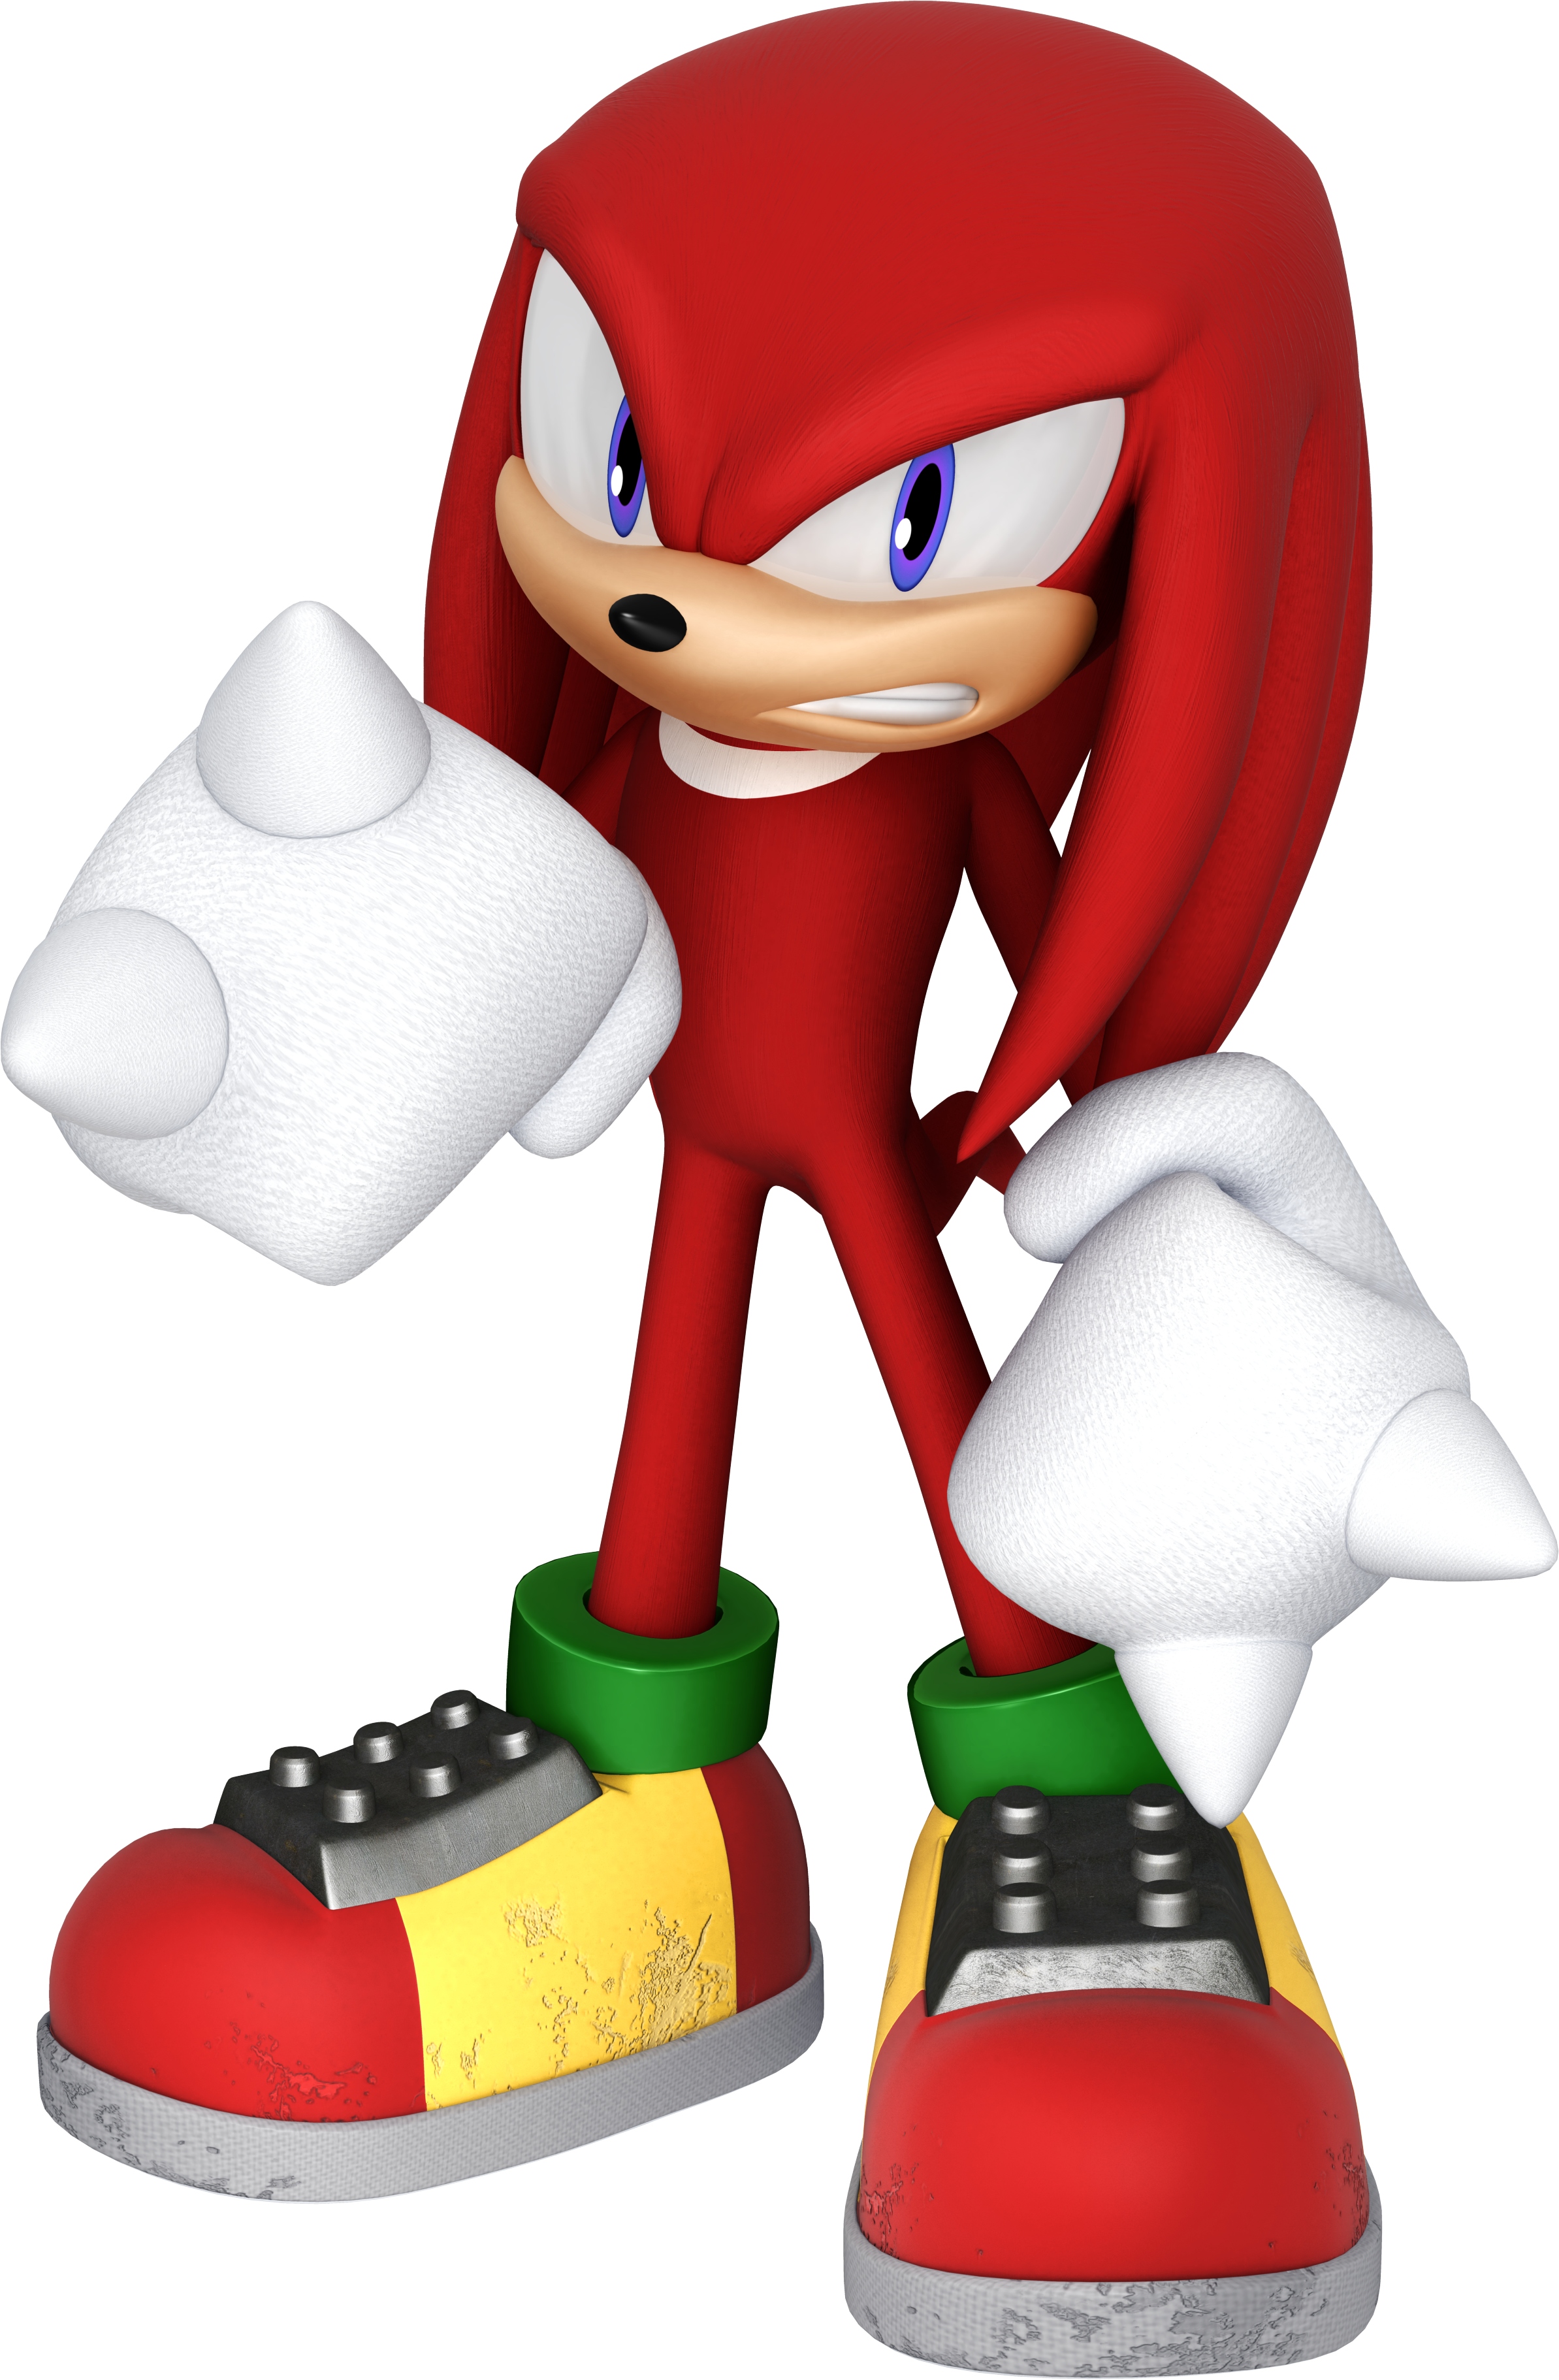 Knuckles Image - Knuckles The Echidna (2387x3644)